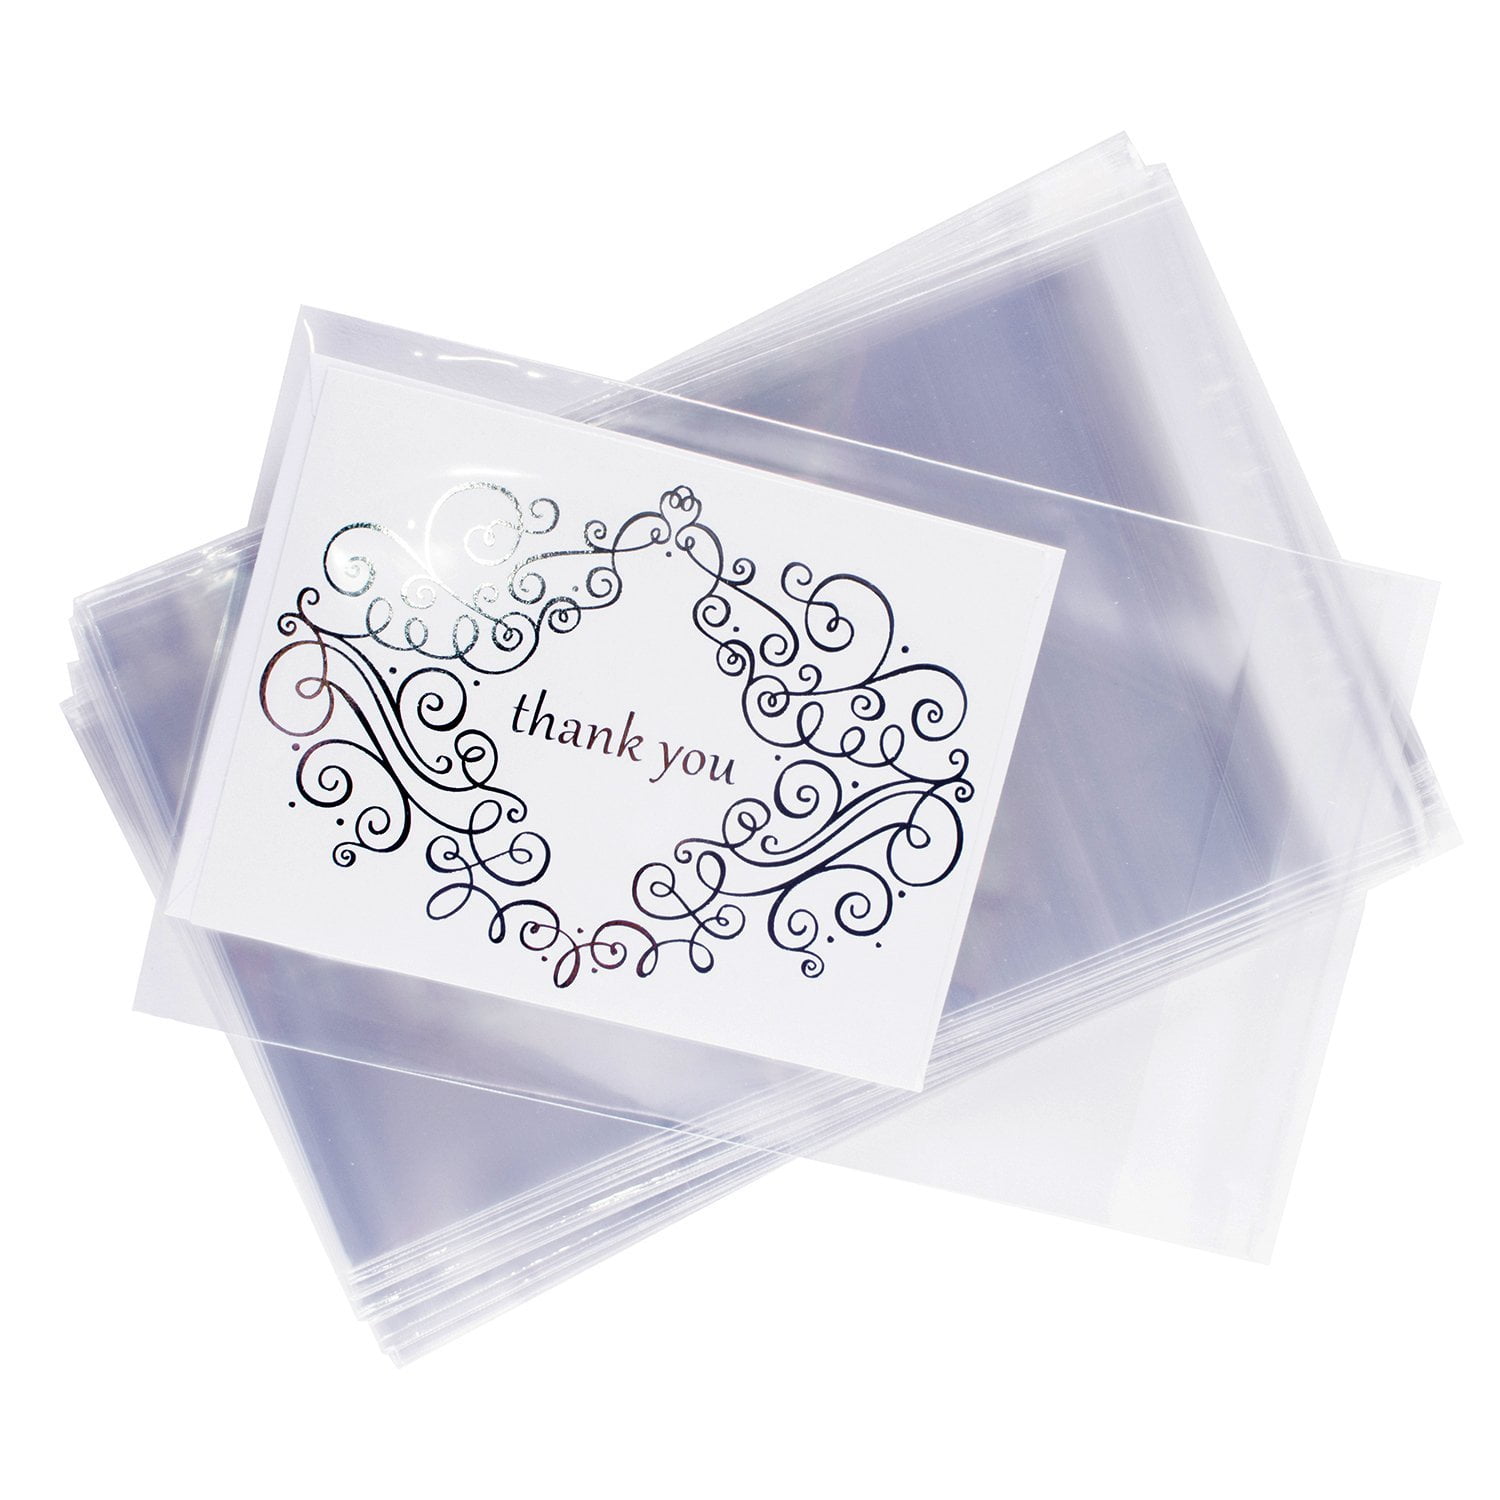 CLEAR Self Seal CELLO Display BAGS Cellophane Bag for Cards Sweet Candy & Gift 